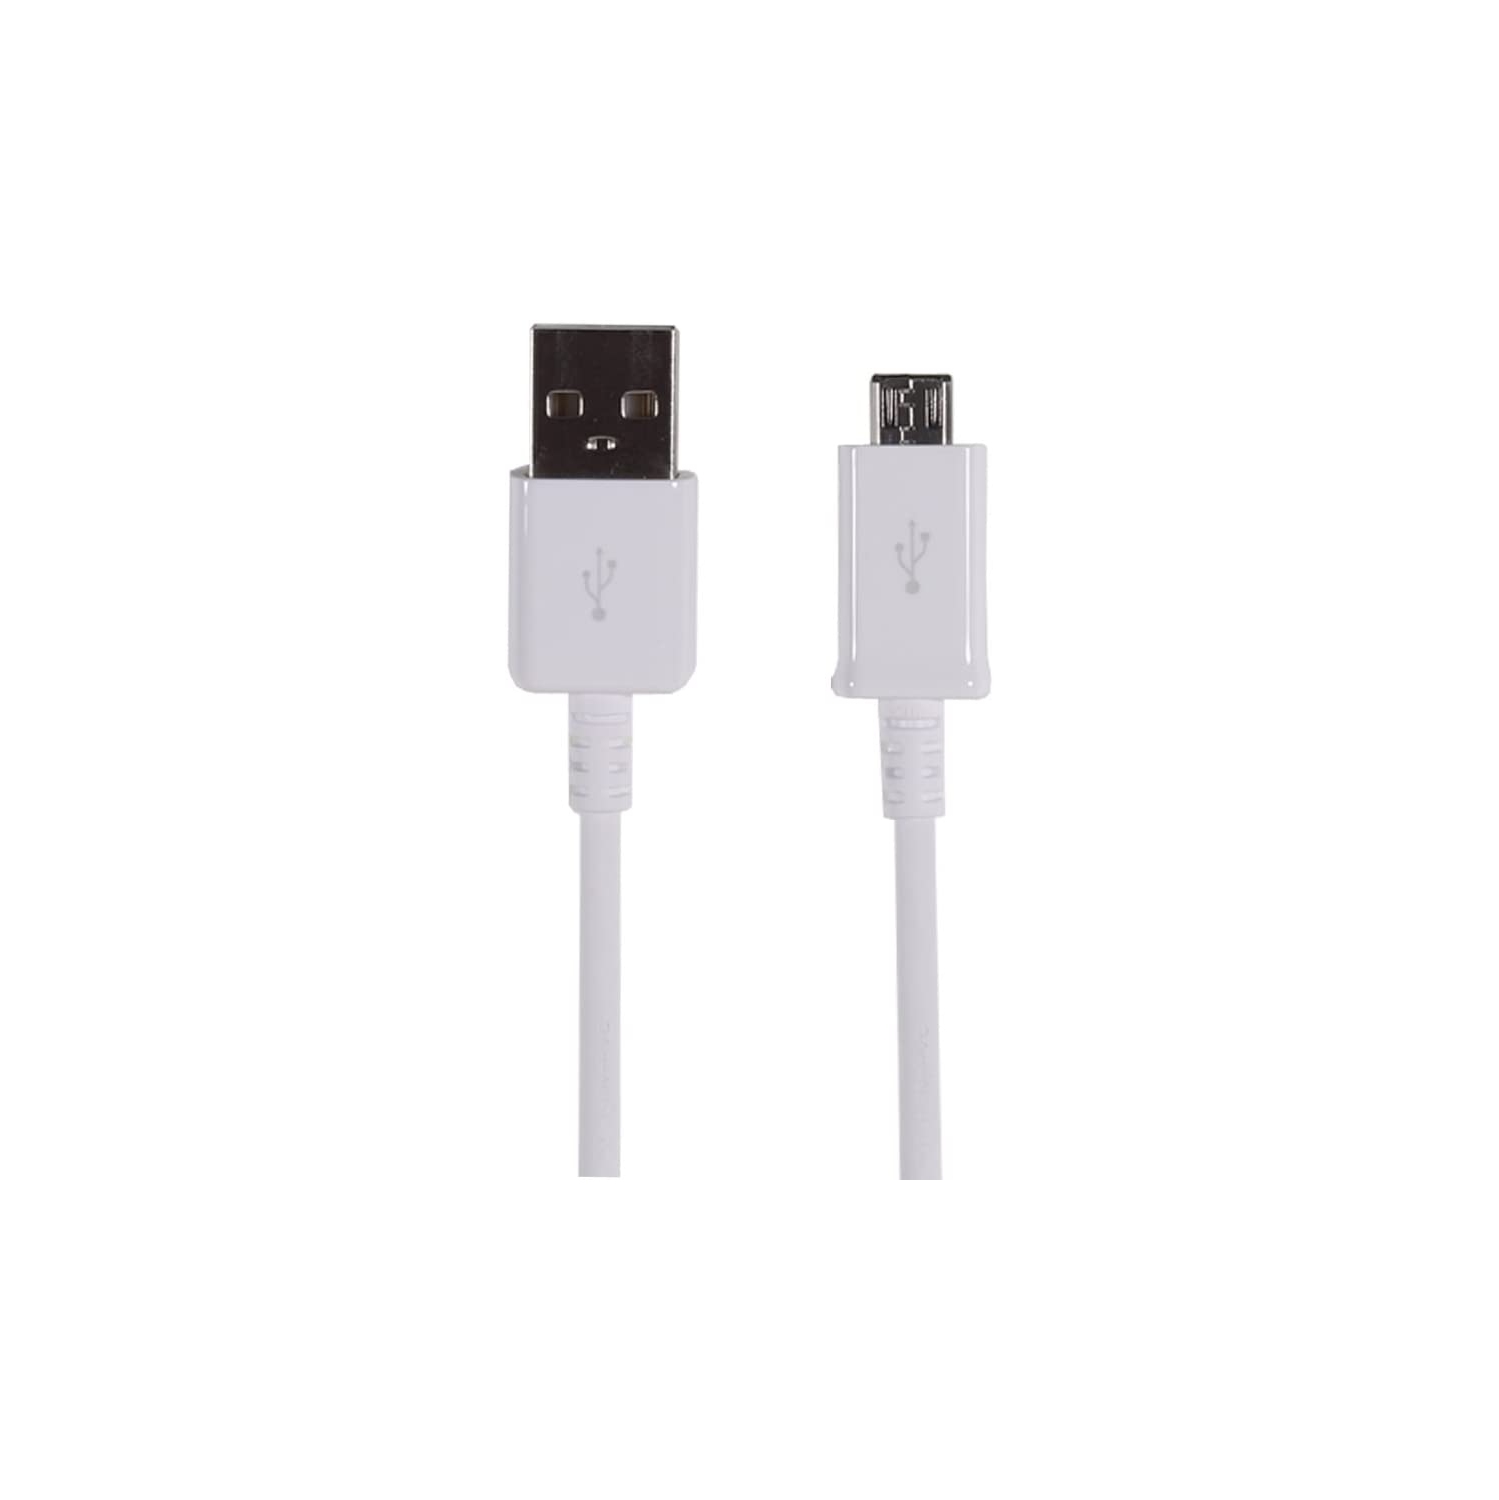 4 Pack - Samsung Galaxy Tab E 9.6 Adaptive Fast Charging Micro USB 2.0 Cable [5 FT Micro USB Cable] Adaptive Fast Charging uses Dual voltages for up to 50% Faster Charging! Bulk Packaging